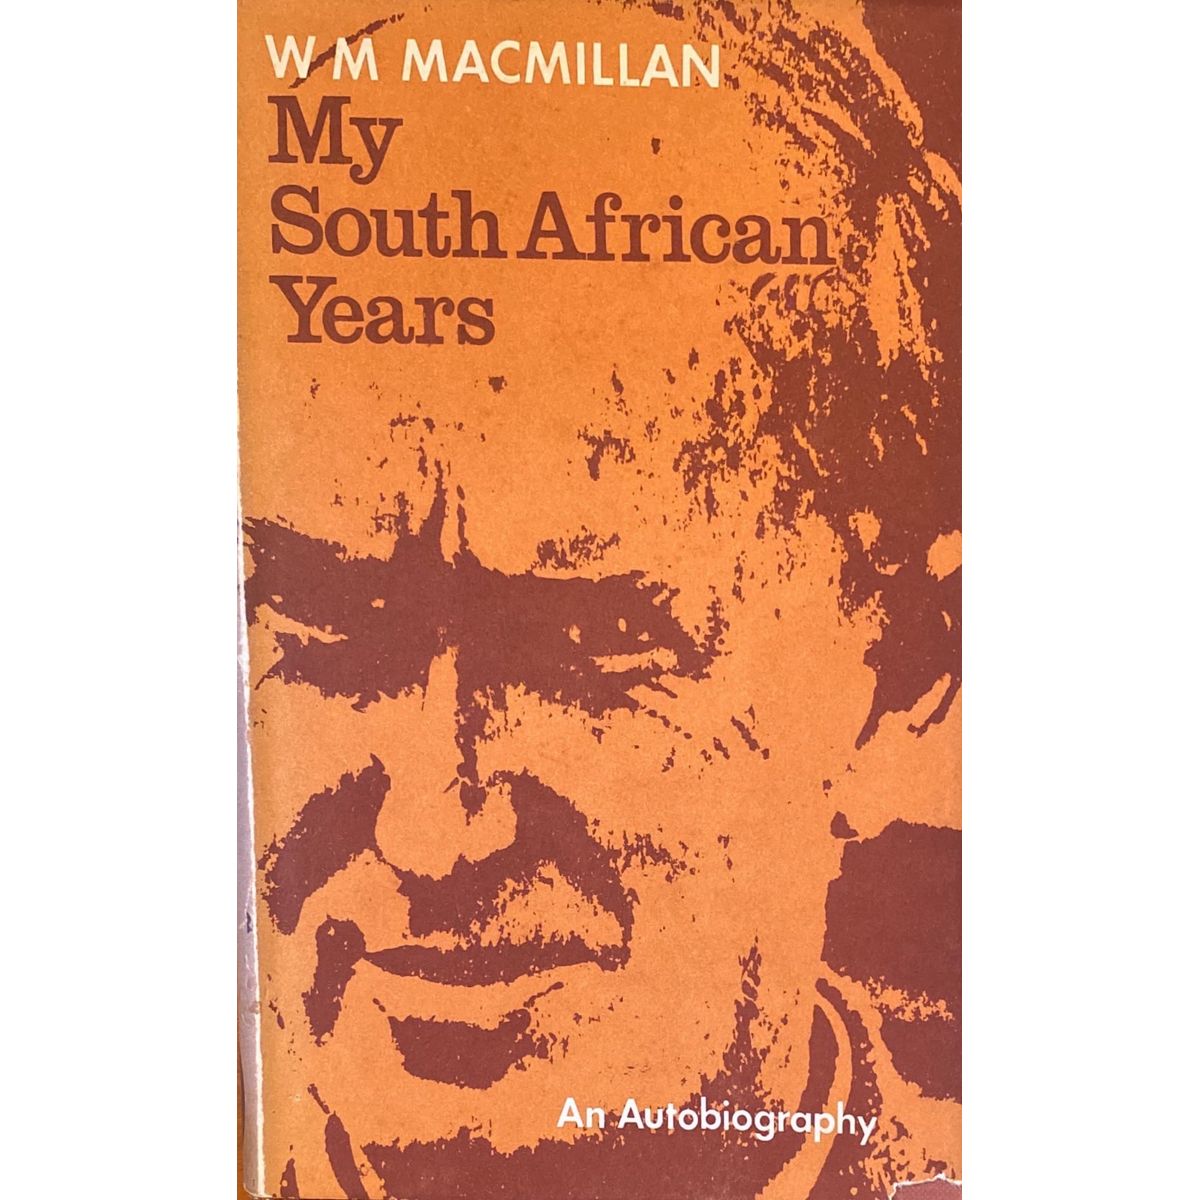 ISBN: 9780949968425 / 0949968420 - My South African Years: An Autobiography by W.M. Macmillan [1975]